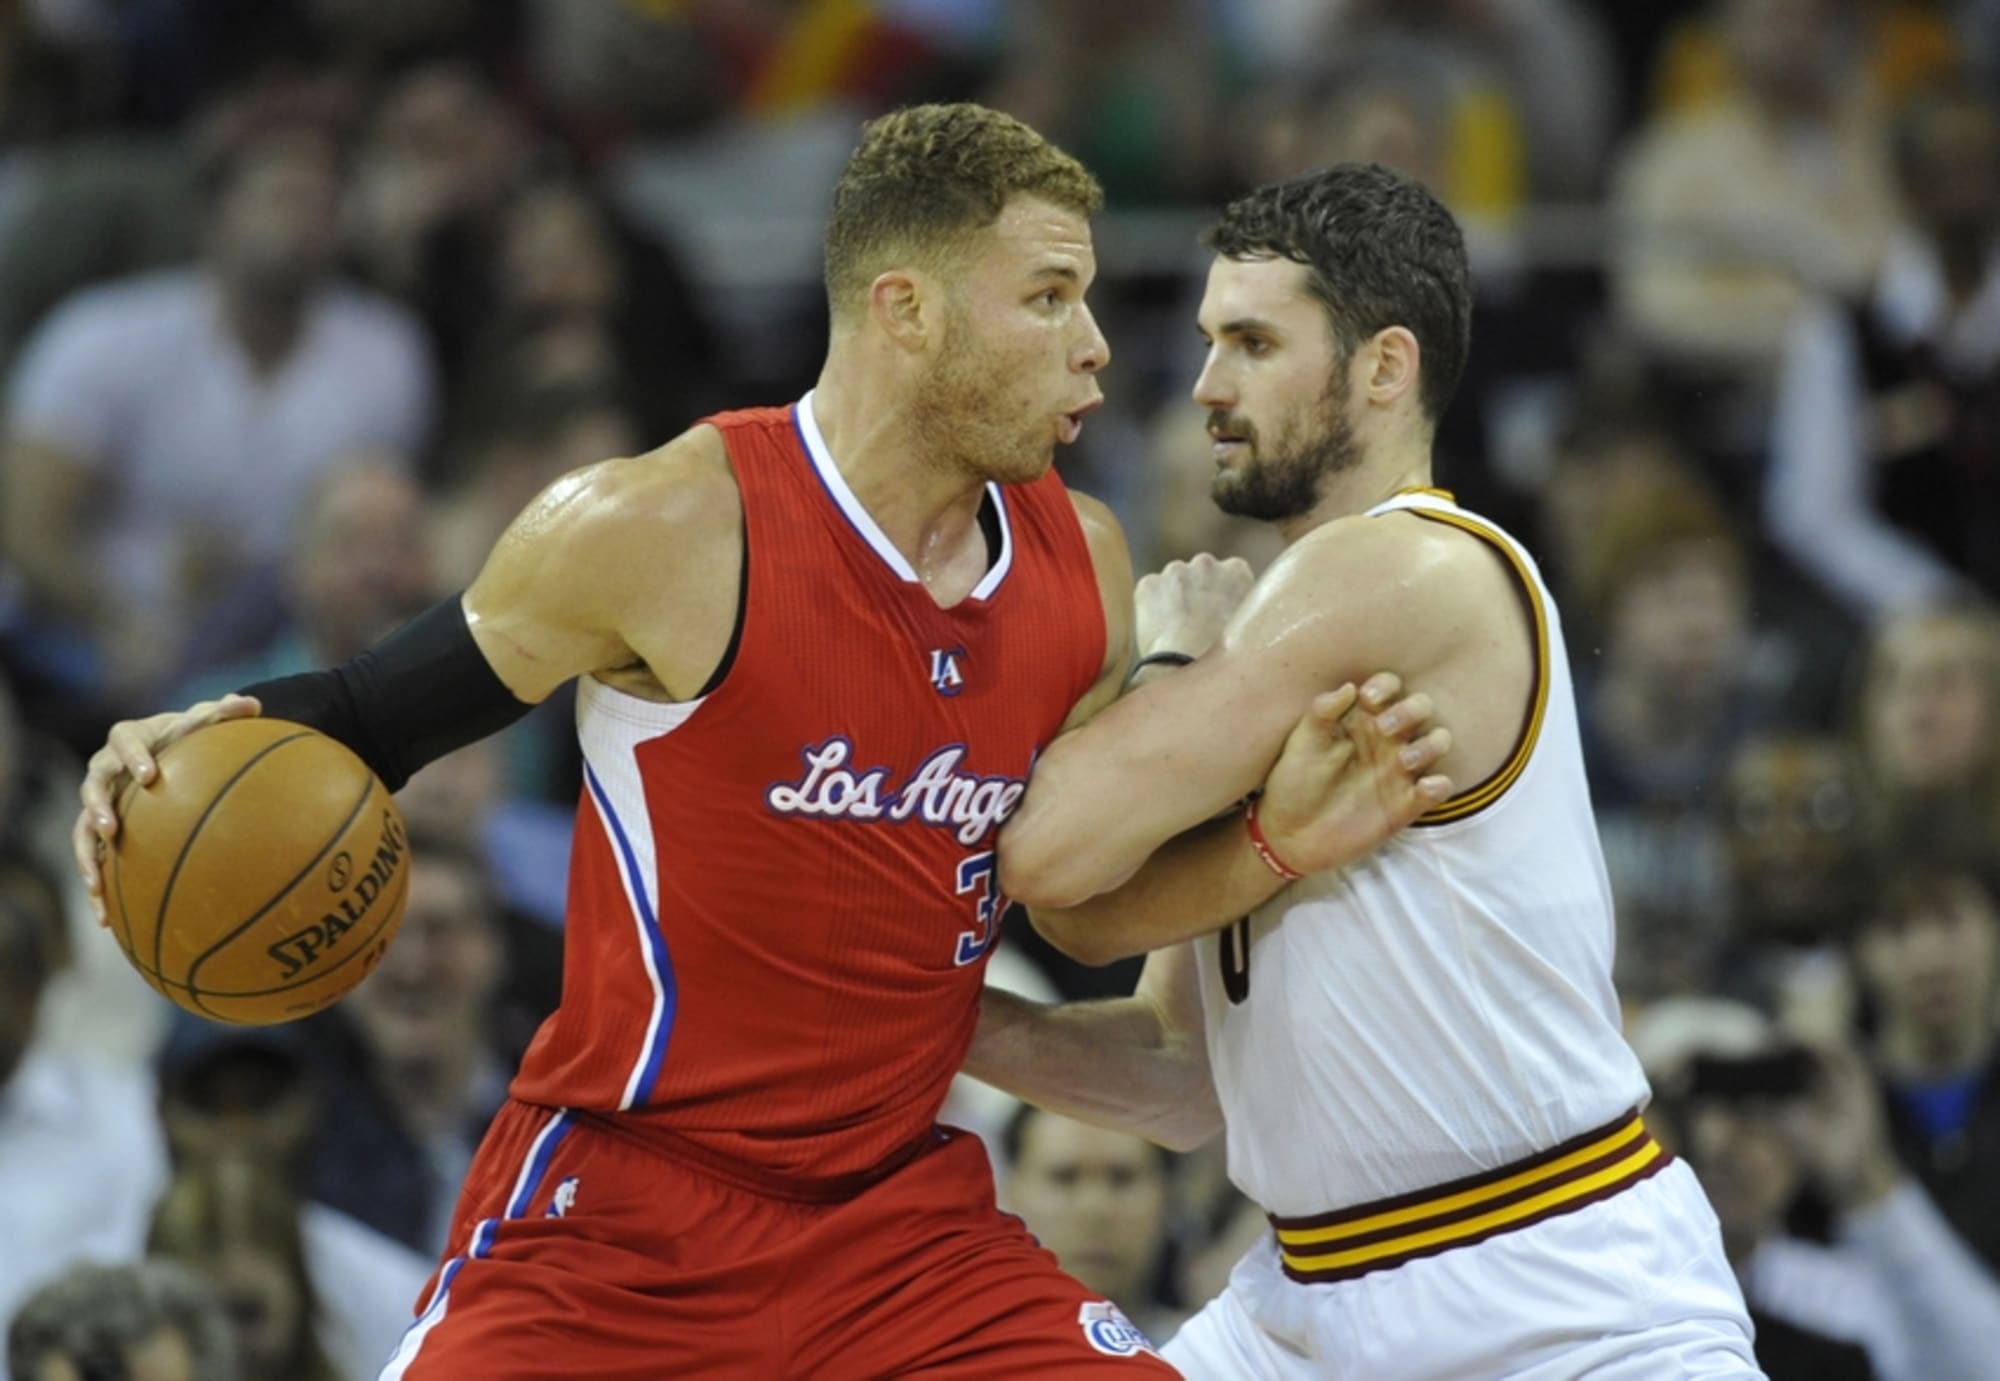 Pistons Forward Blake Griffin Rips Jersey Following Frustrating